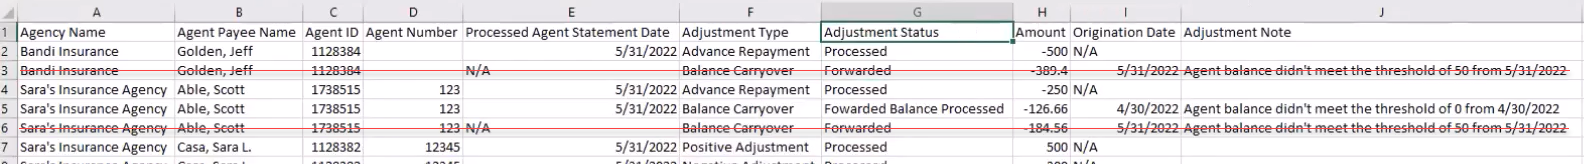 Screenshot showing which rows to remove to prepare the report file for merging with Agent Statements